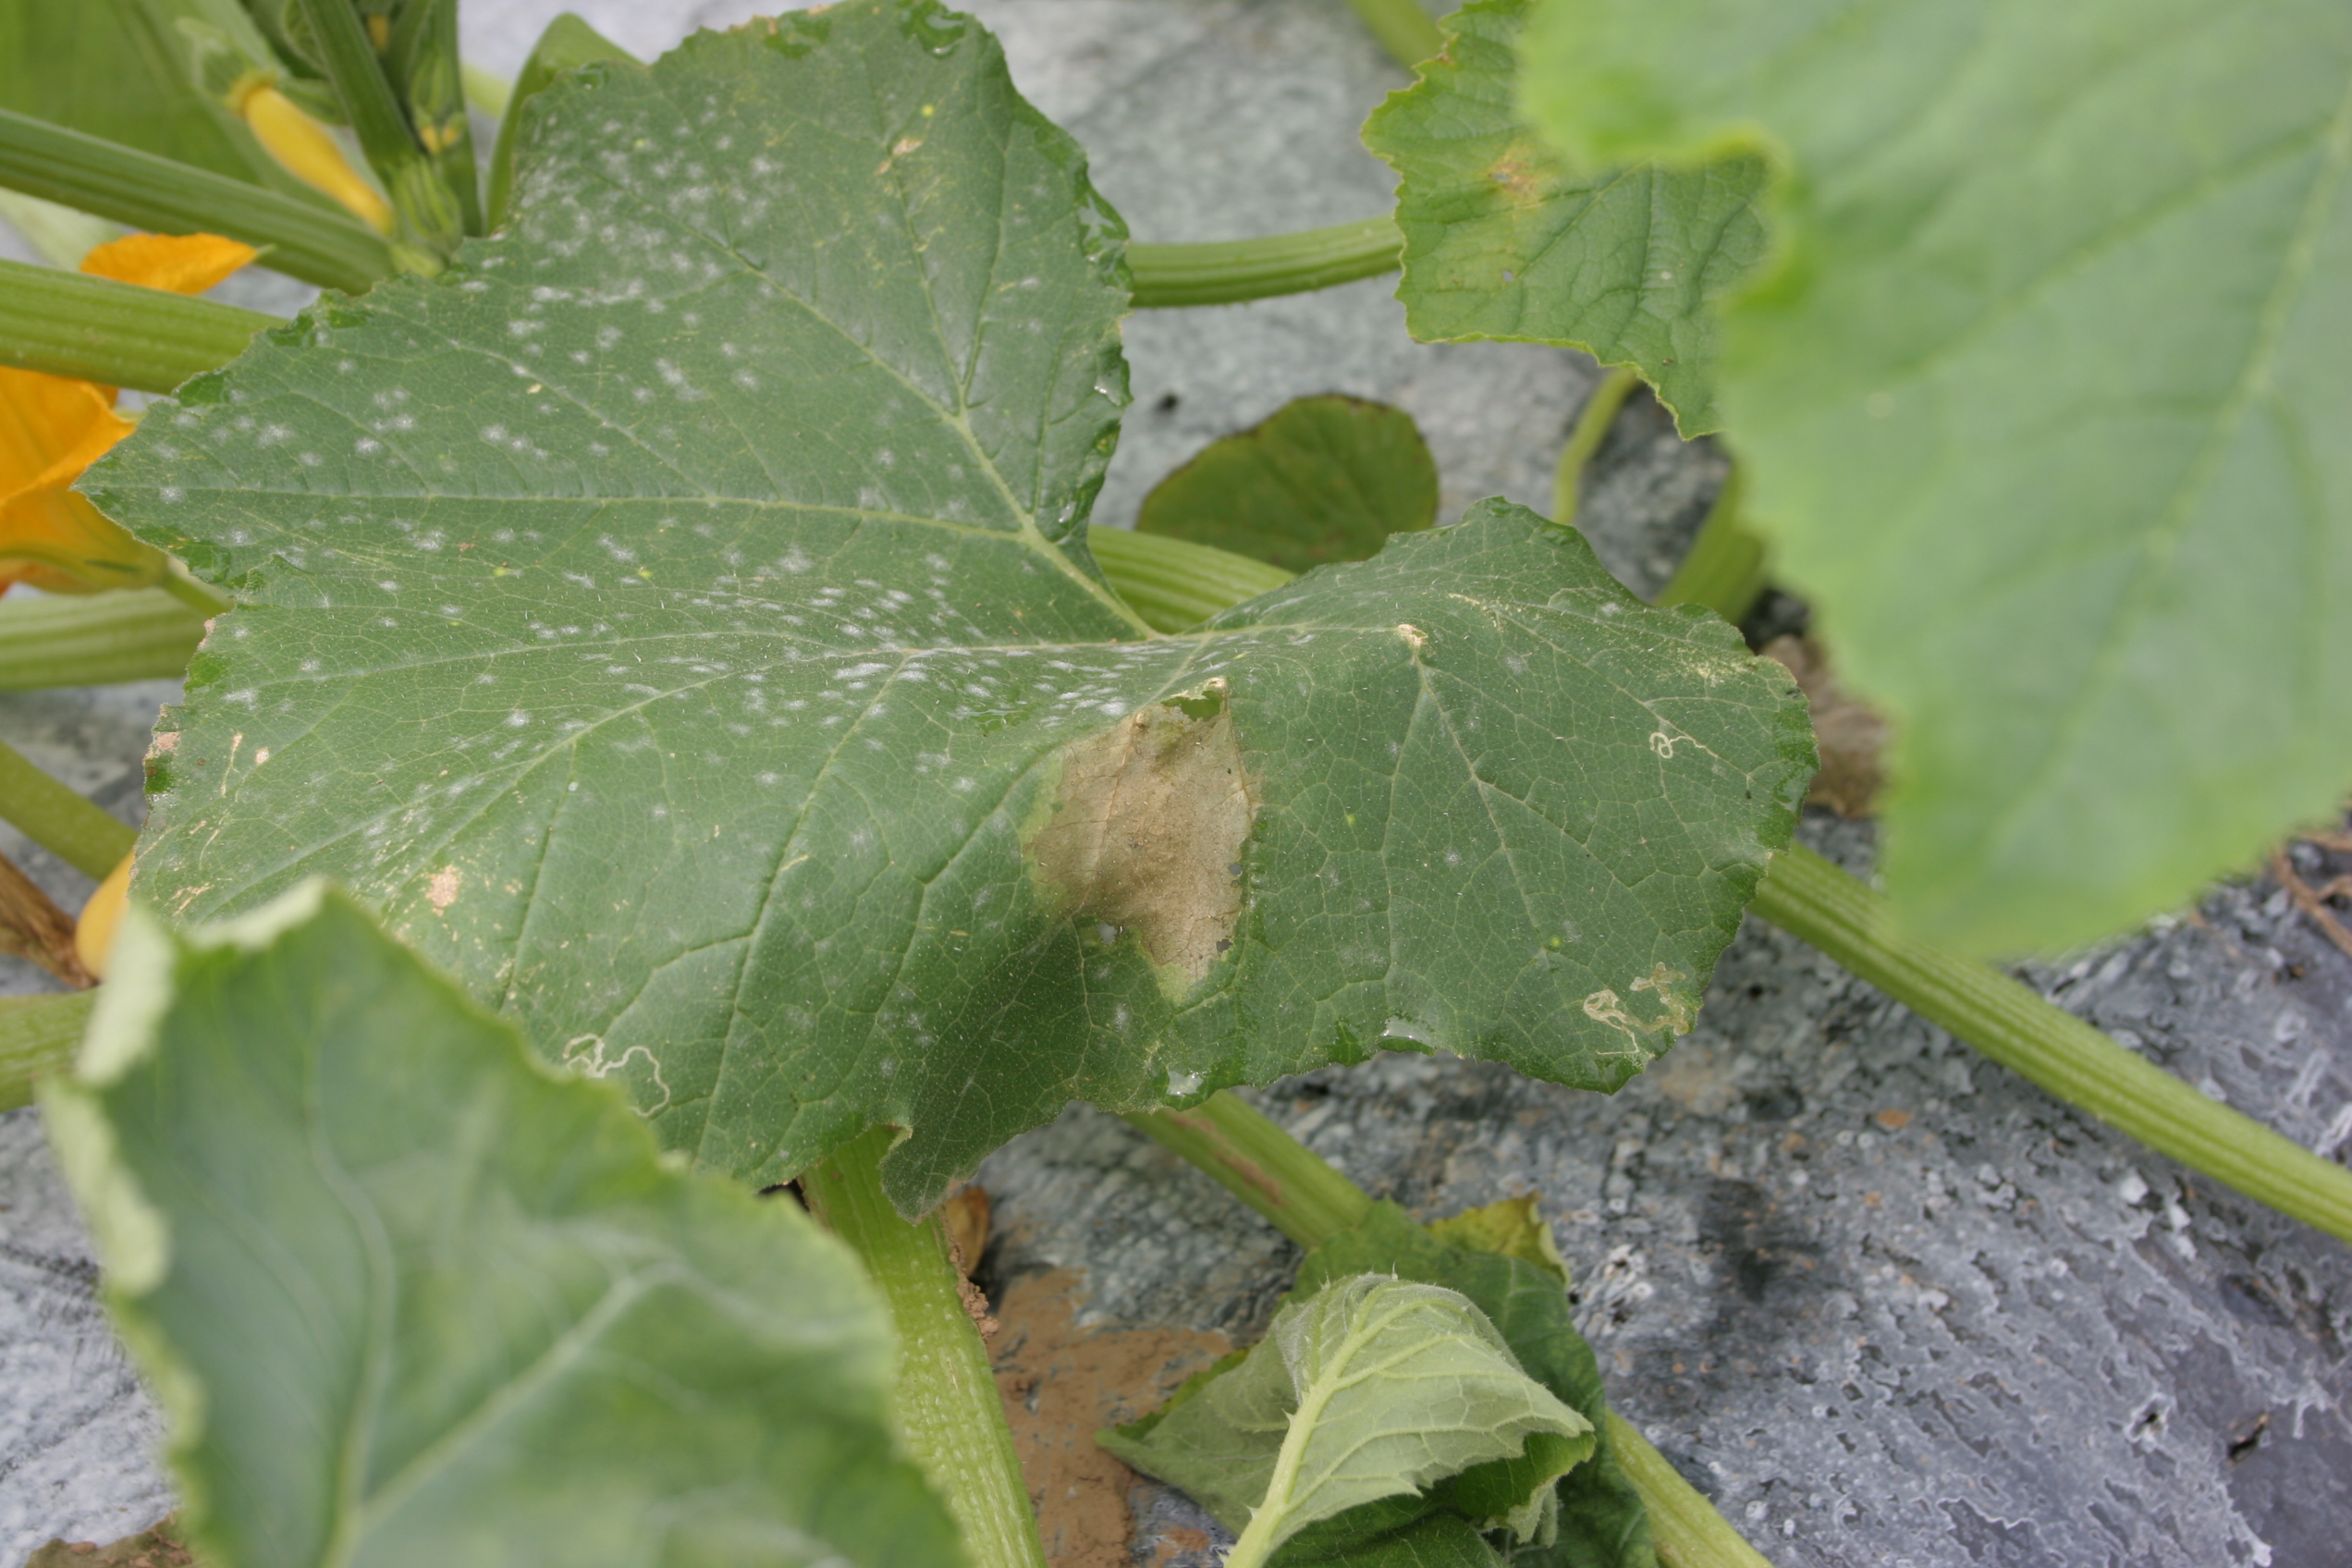 Phytophthora blight leaf lesion on yellow squash.